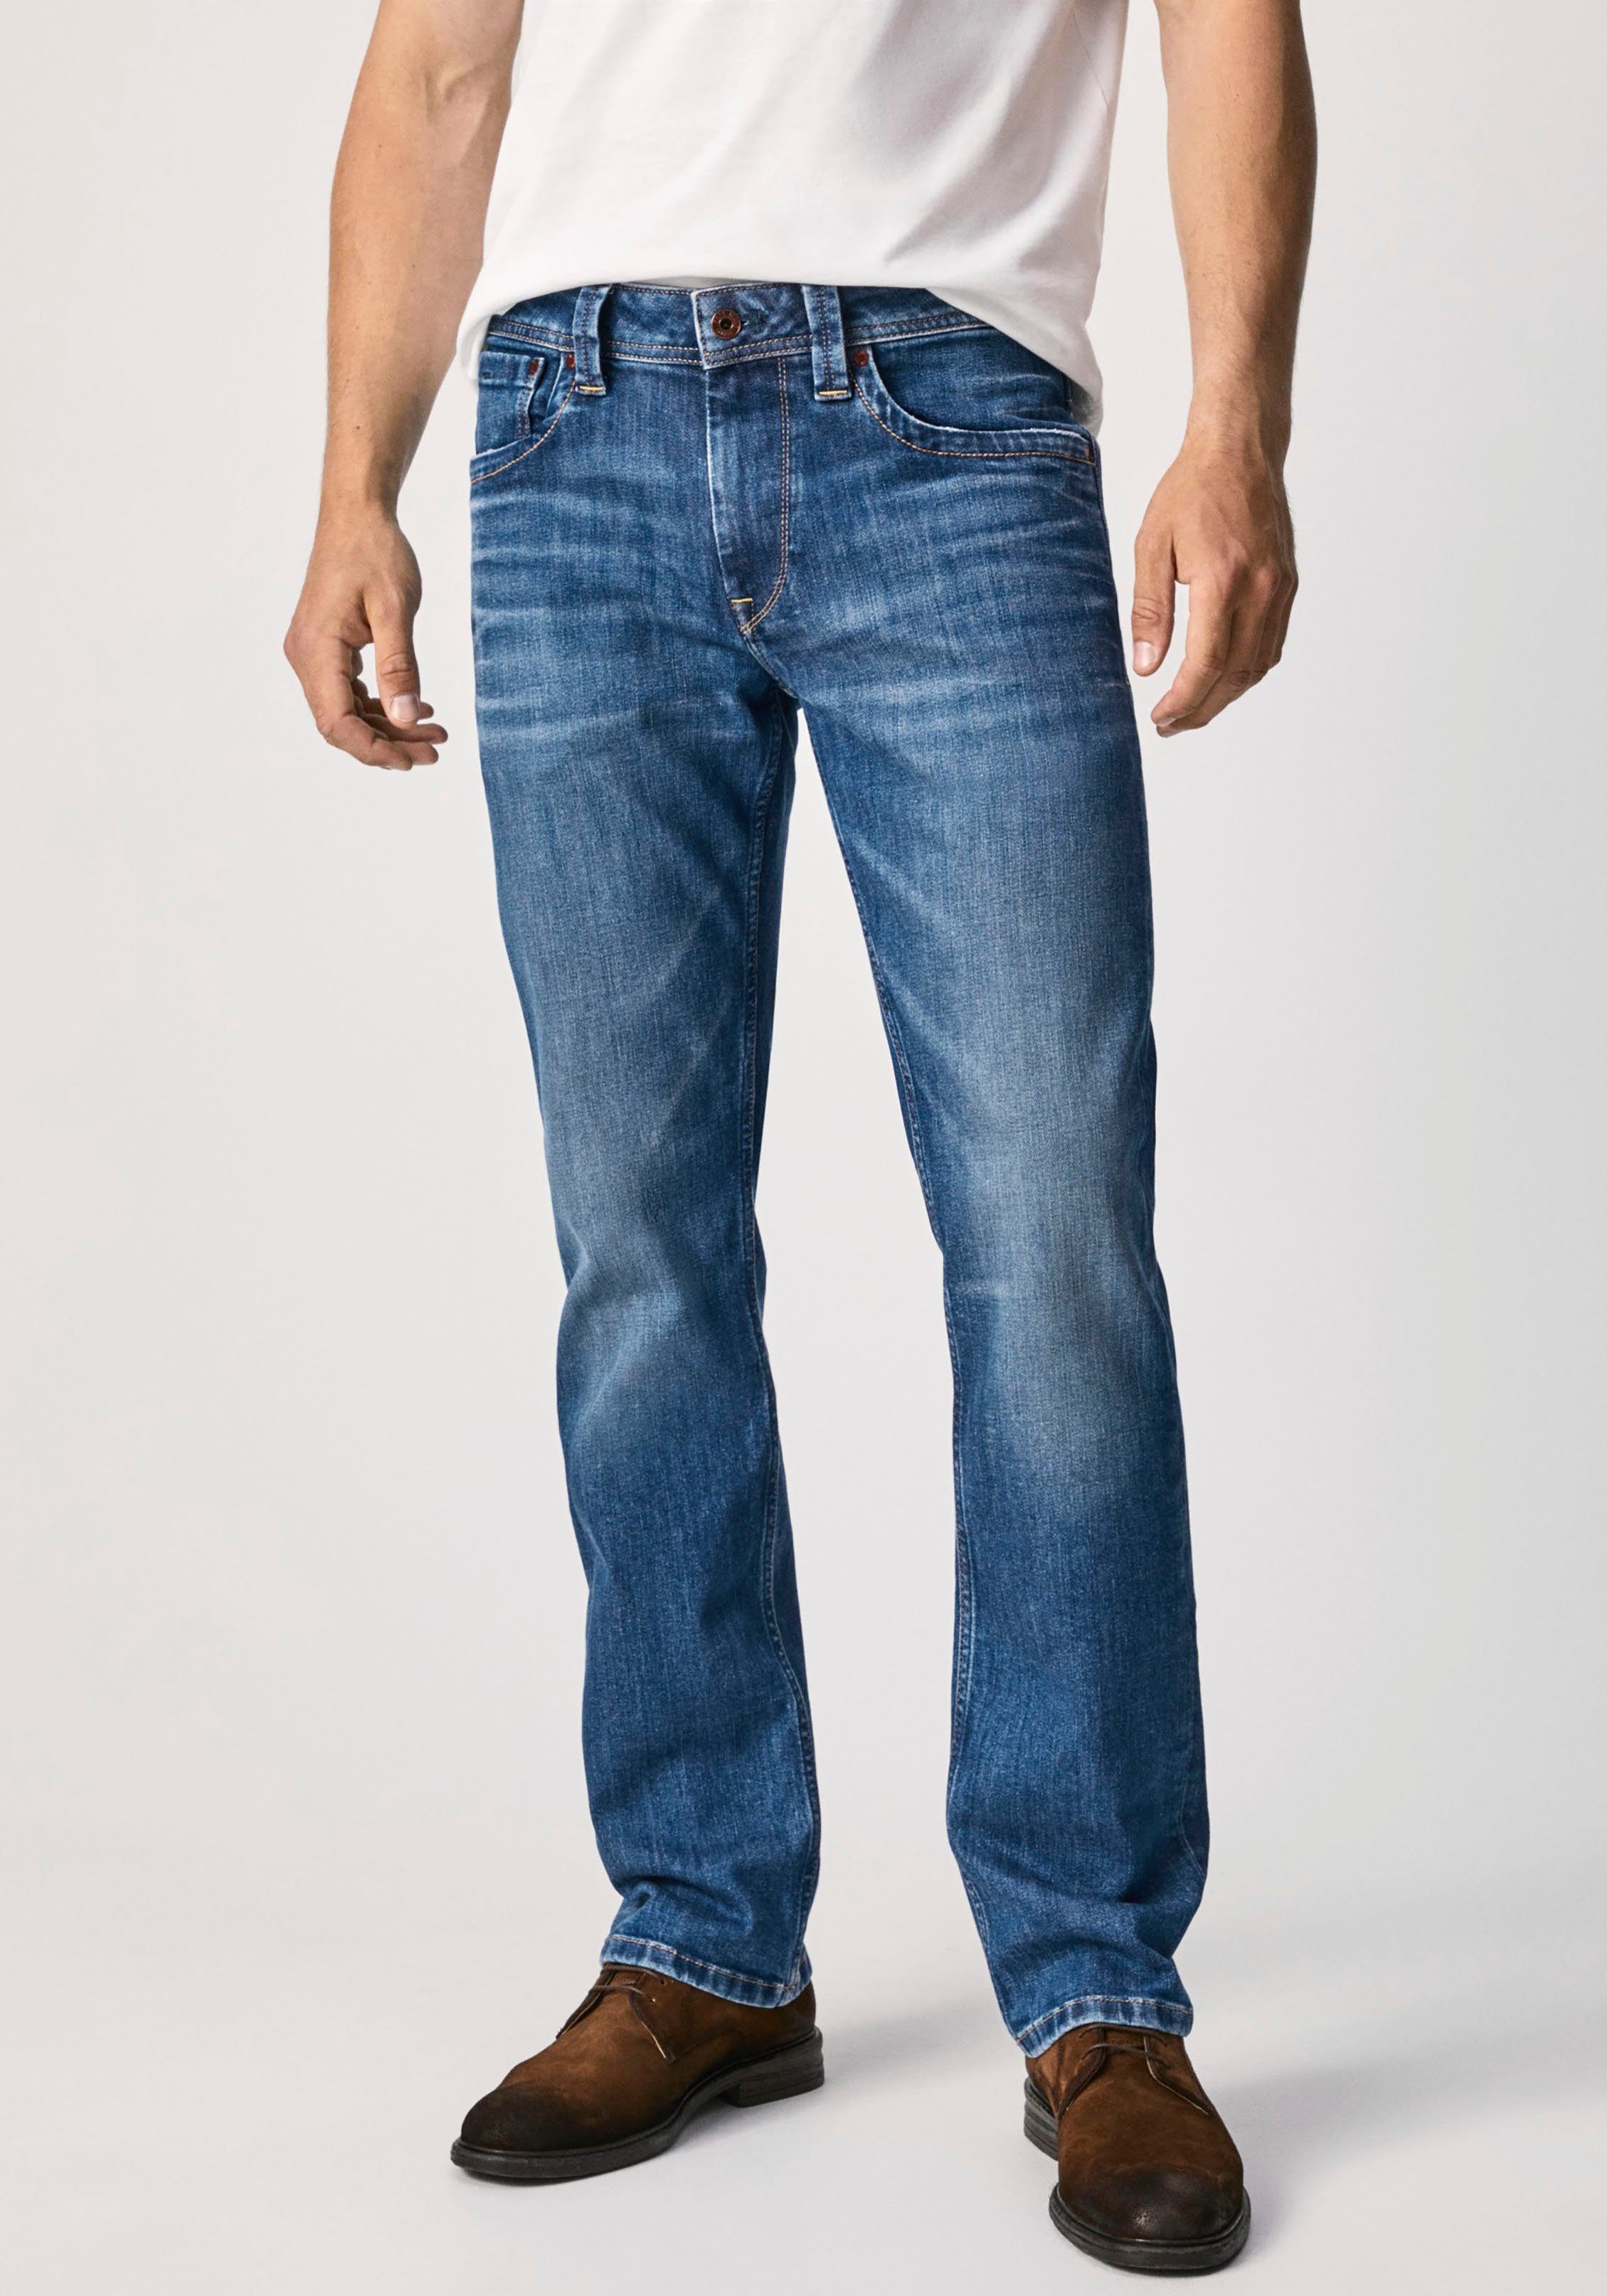 Pepe Jeans Straight-Jeans »KINGSTON ZIP« in 5-Pocket-Form